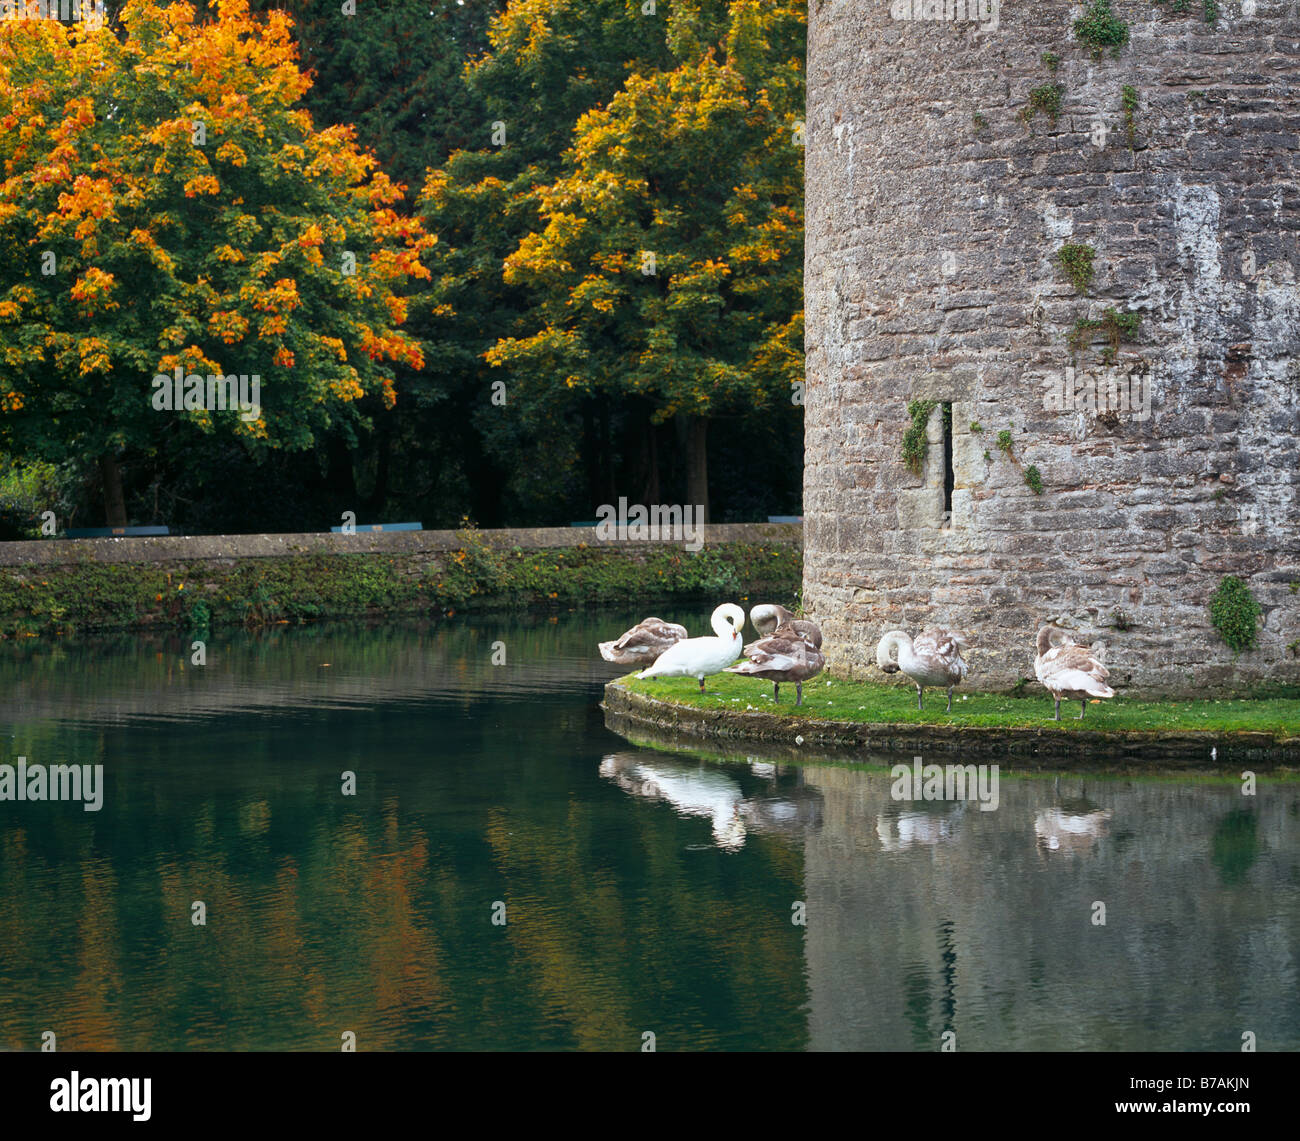 Swans beside the Bishop's Palace garden moat in the City of Wells, Somerset, England. Stock Photo